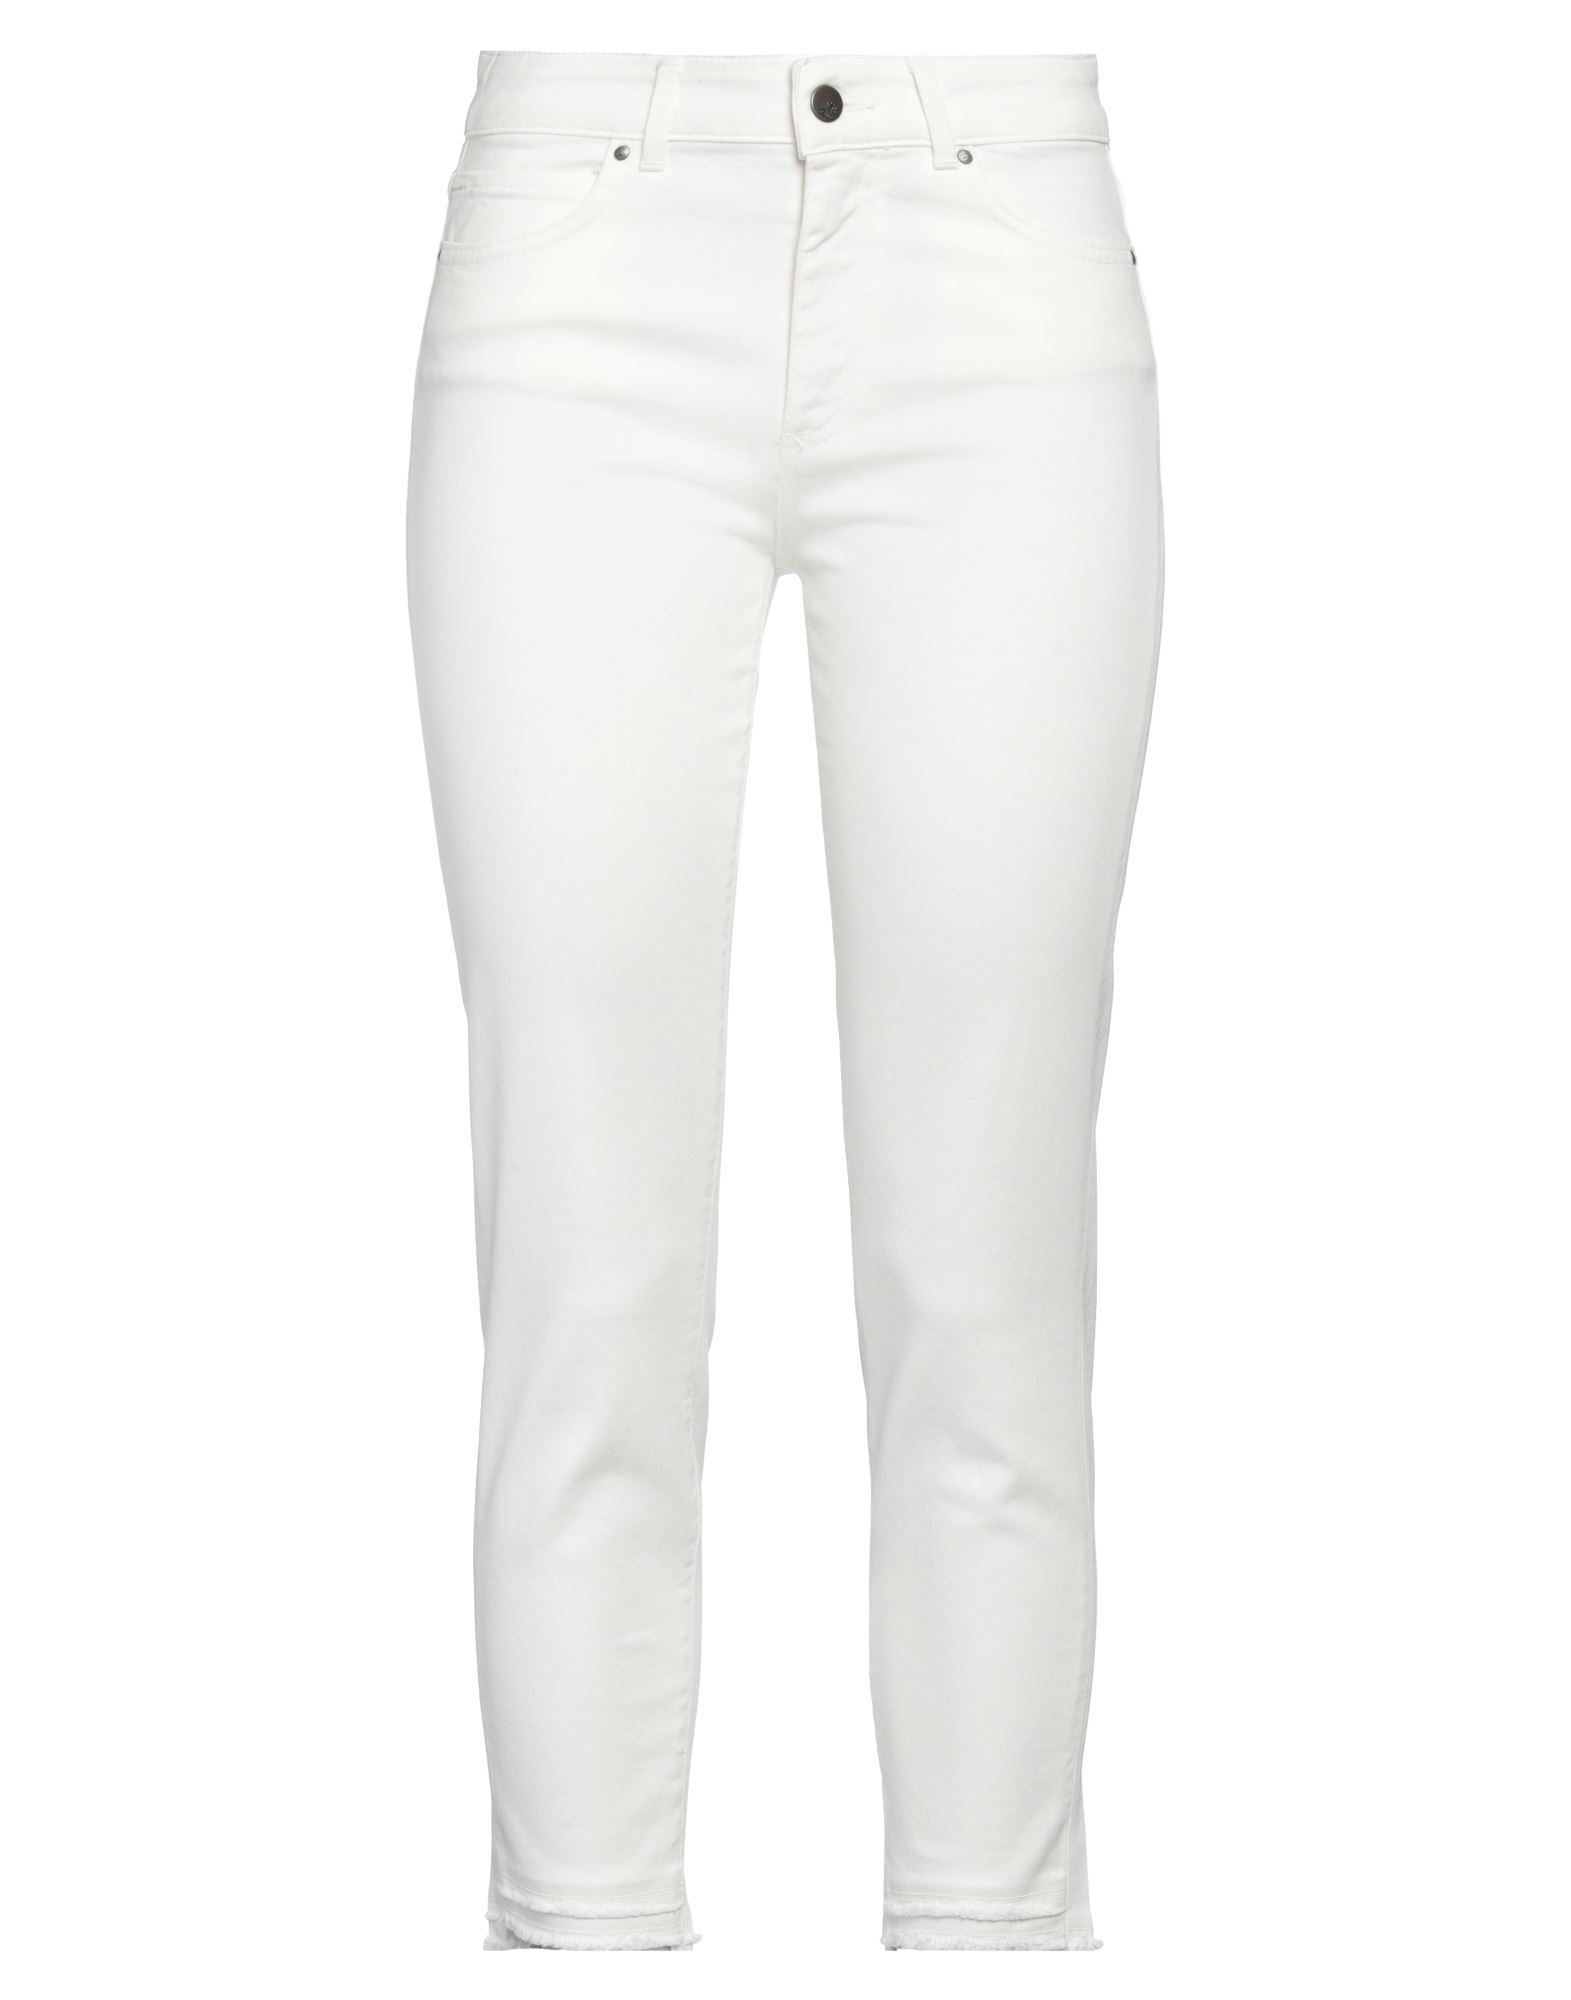 Cigala's Jeans In White